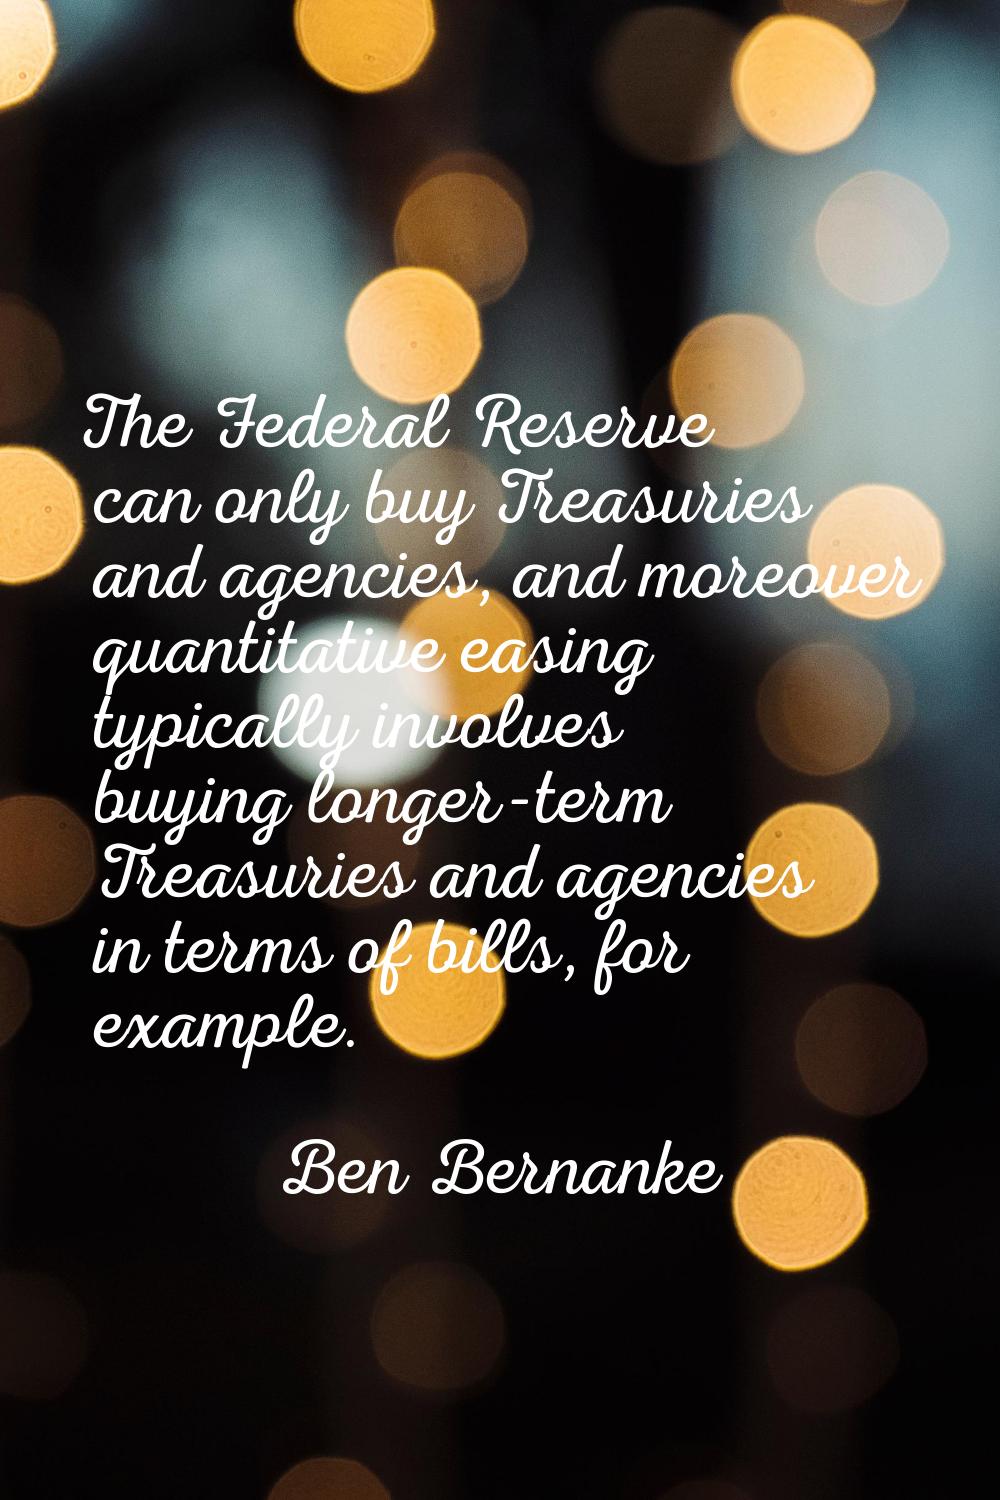 The Federal Reserve can only buy Treasuries and agencies, and moreover quantitative easing typicall